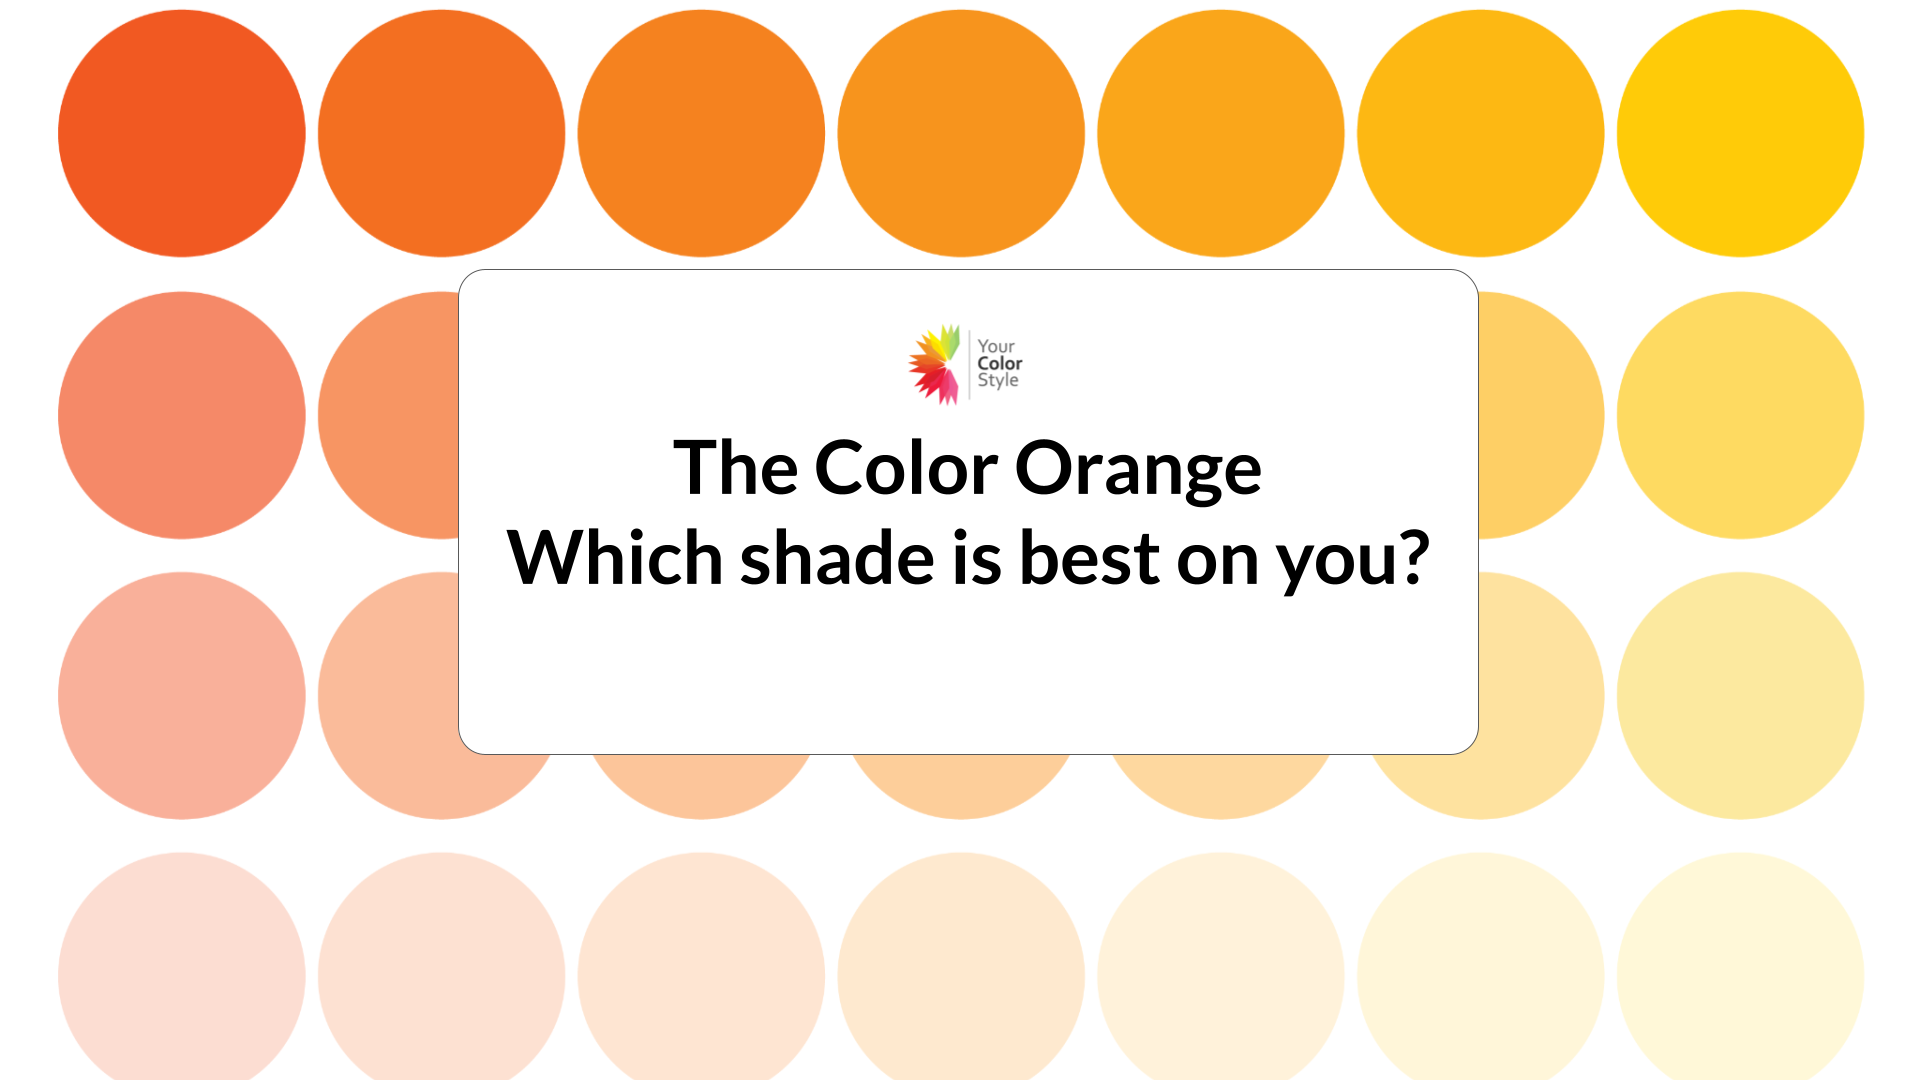 The Color Orange - Which shade is best on you to wear?